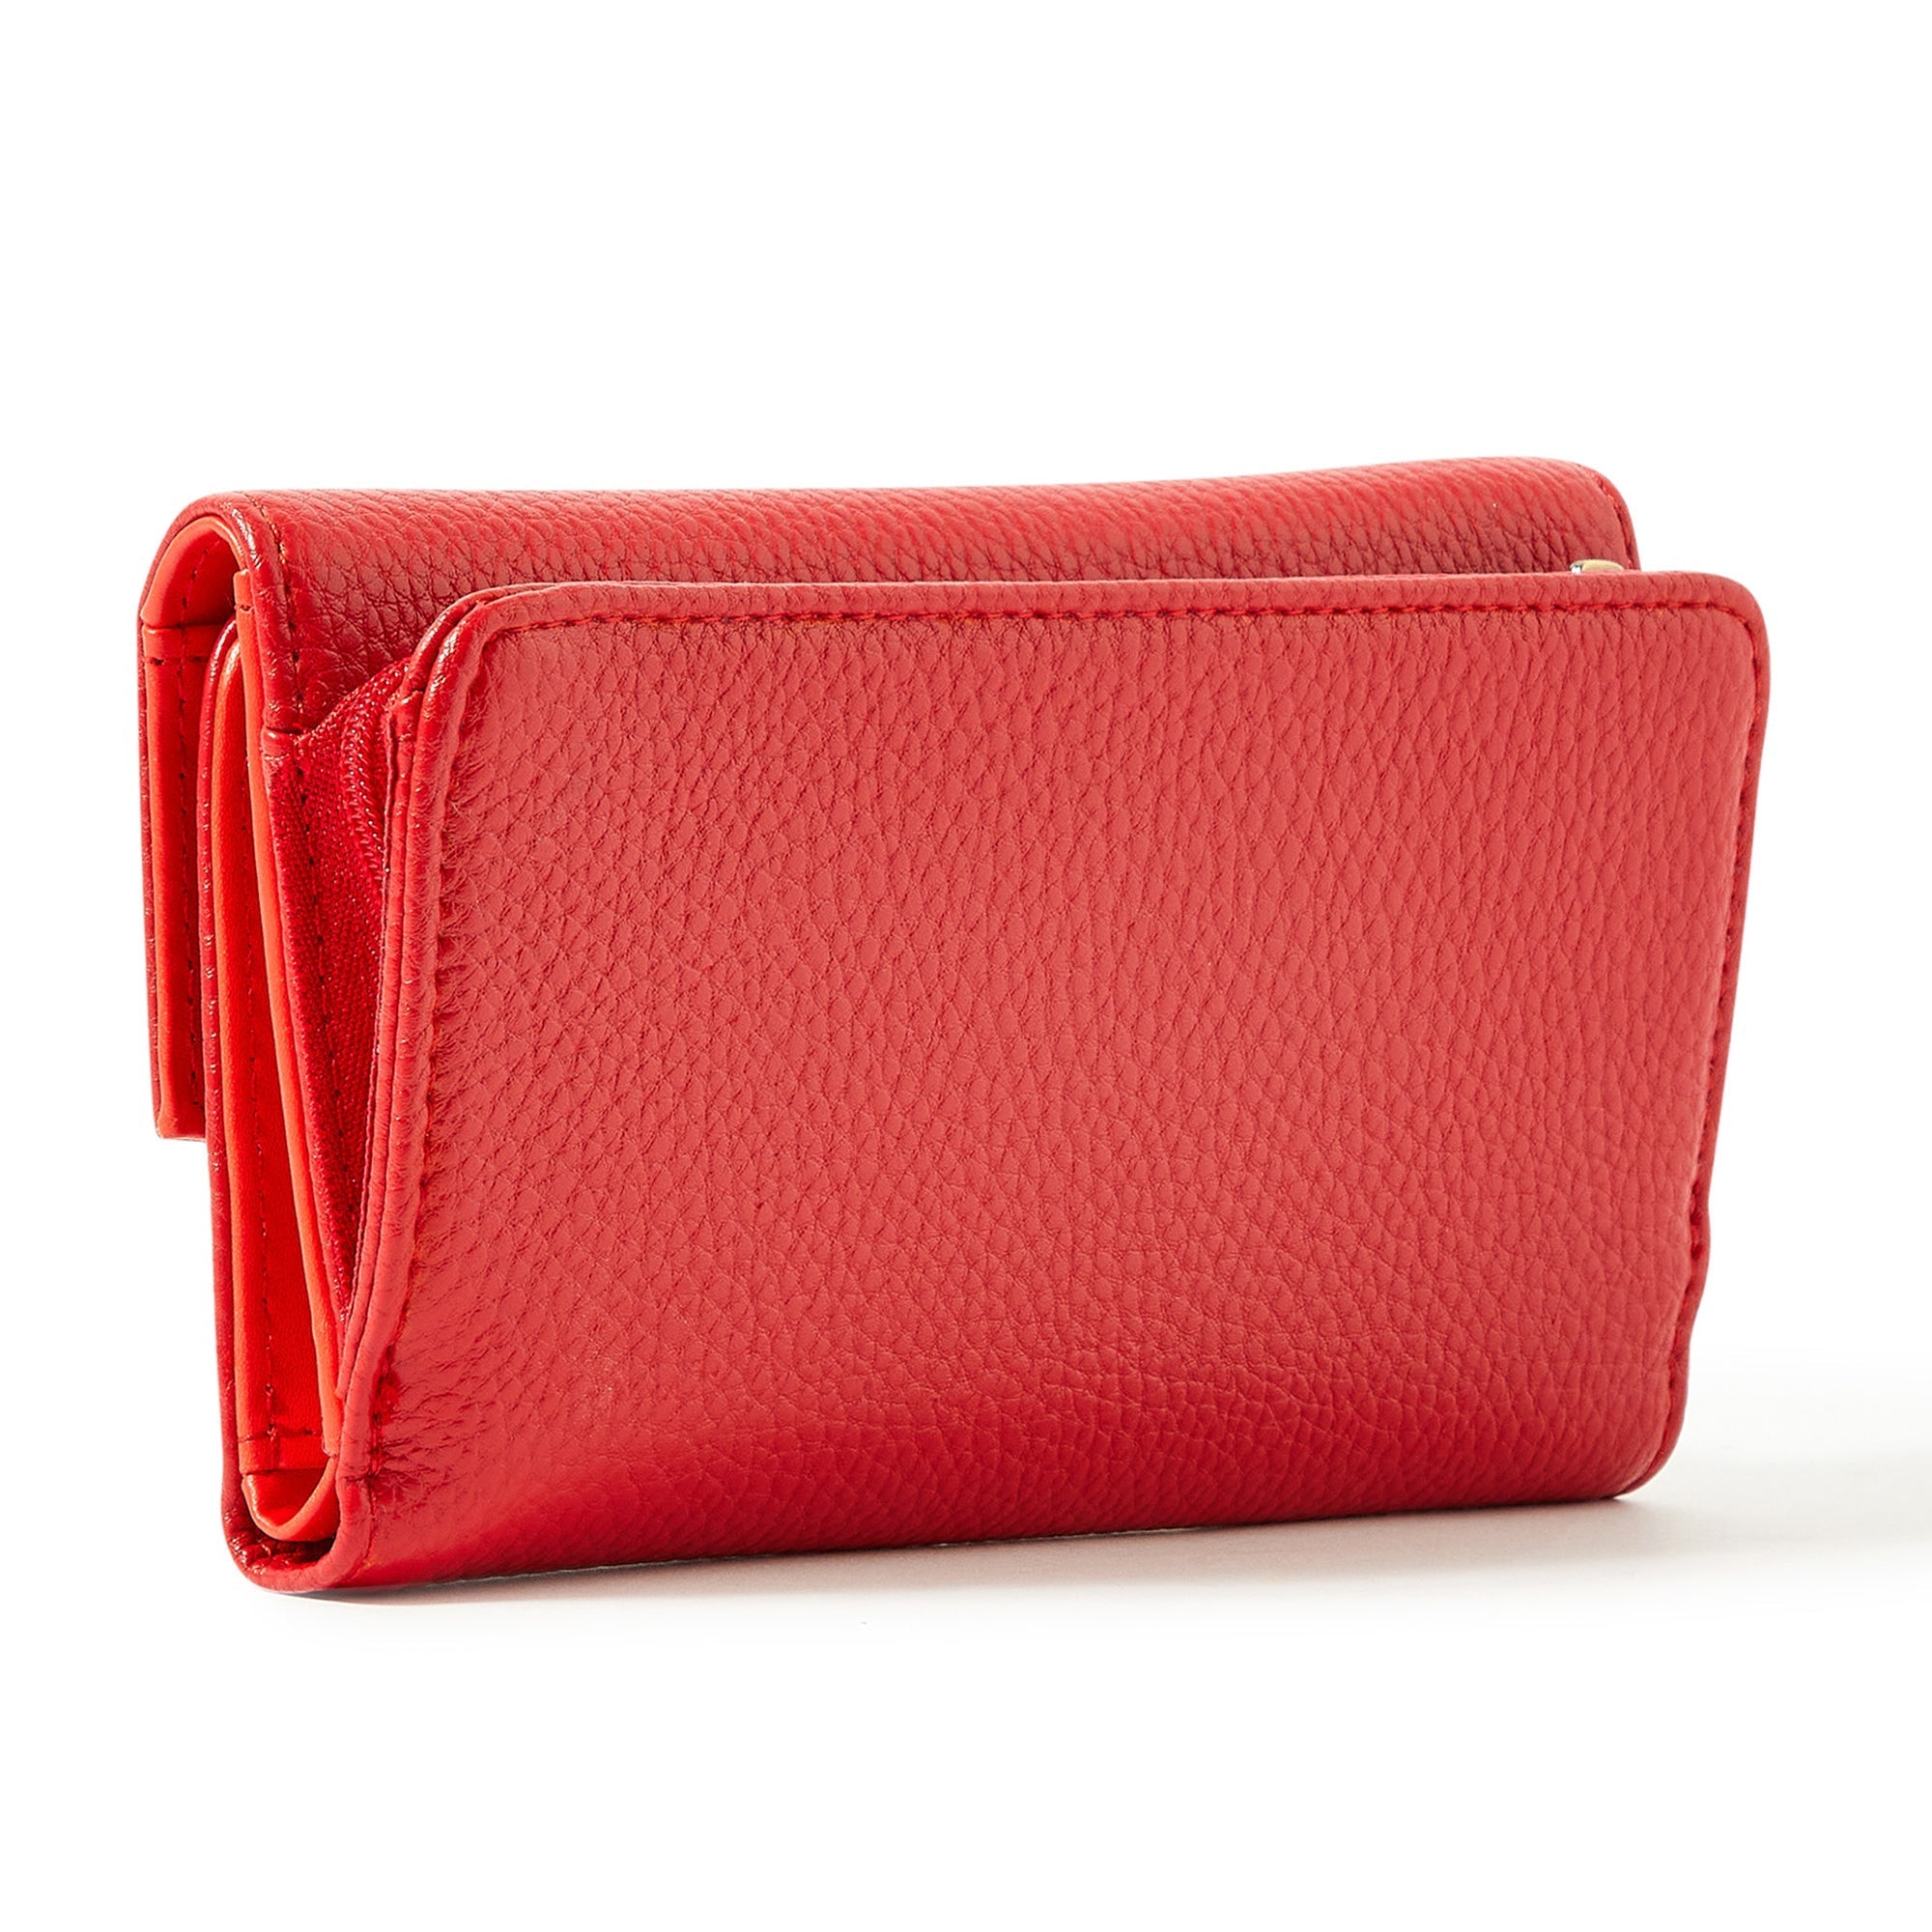 Red - Leather Coin Purse by Marshé - Dead People's Stuff 